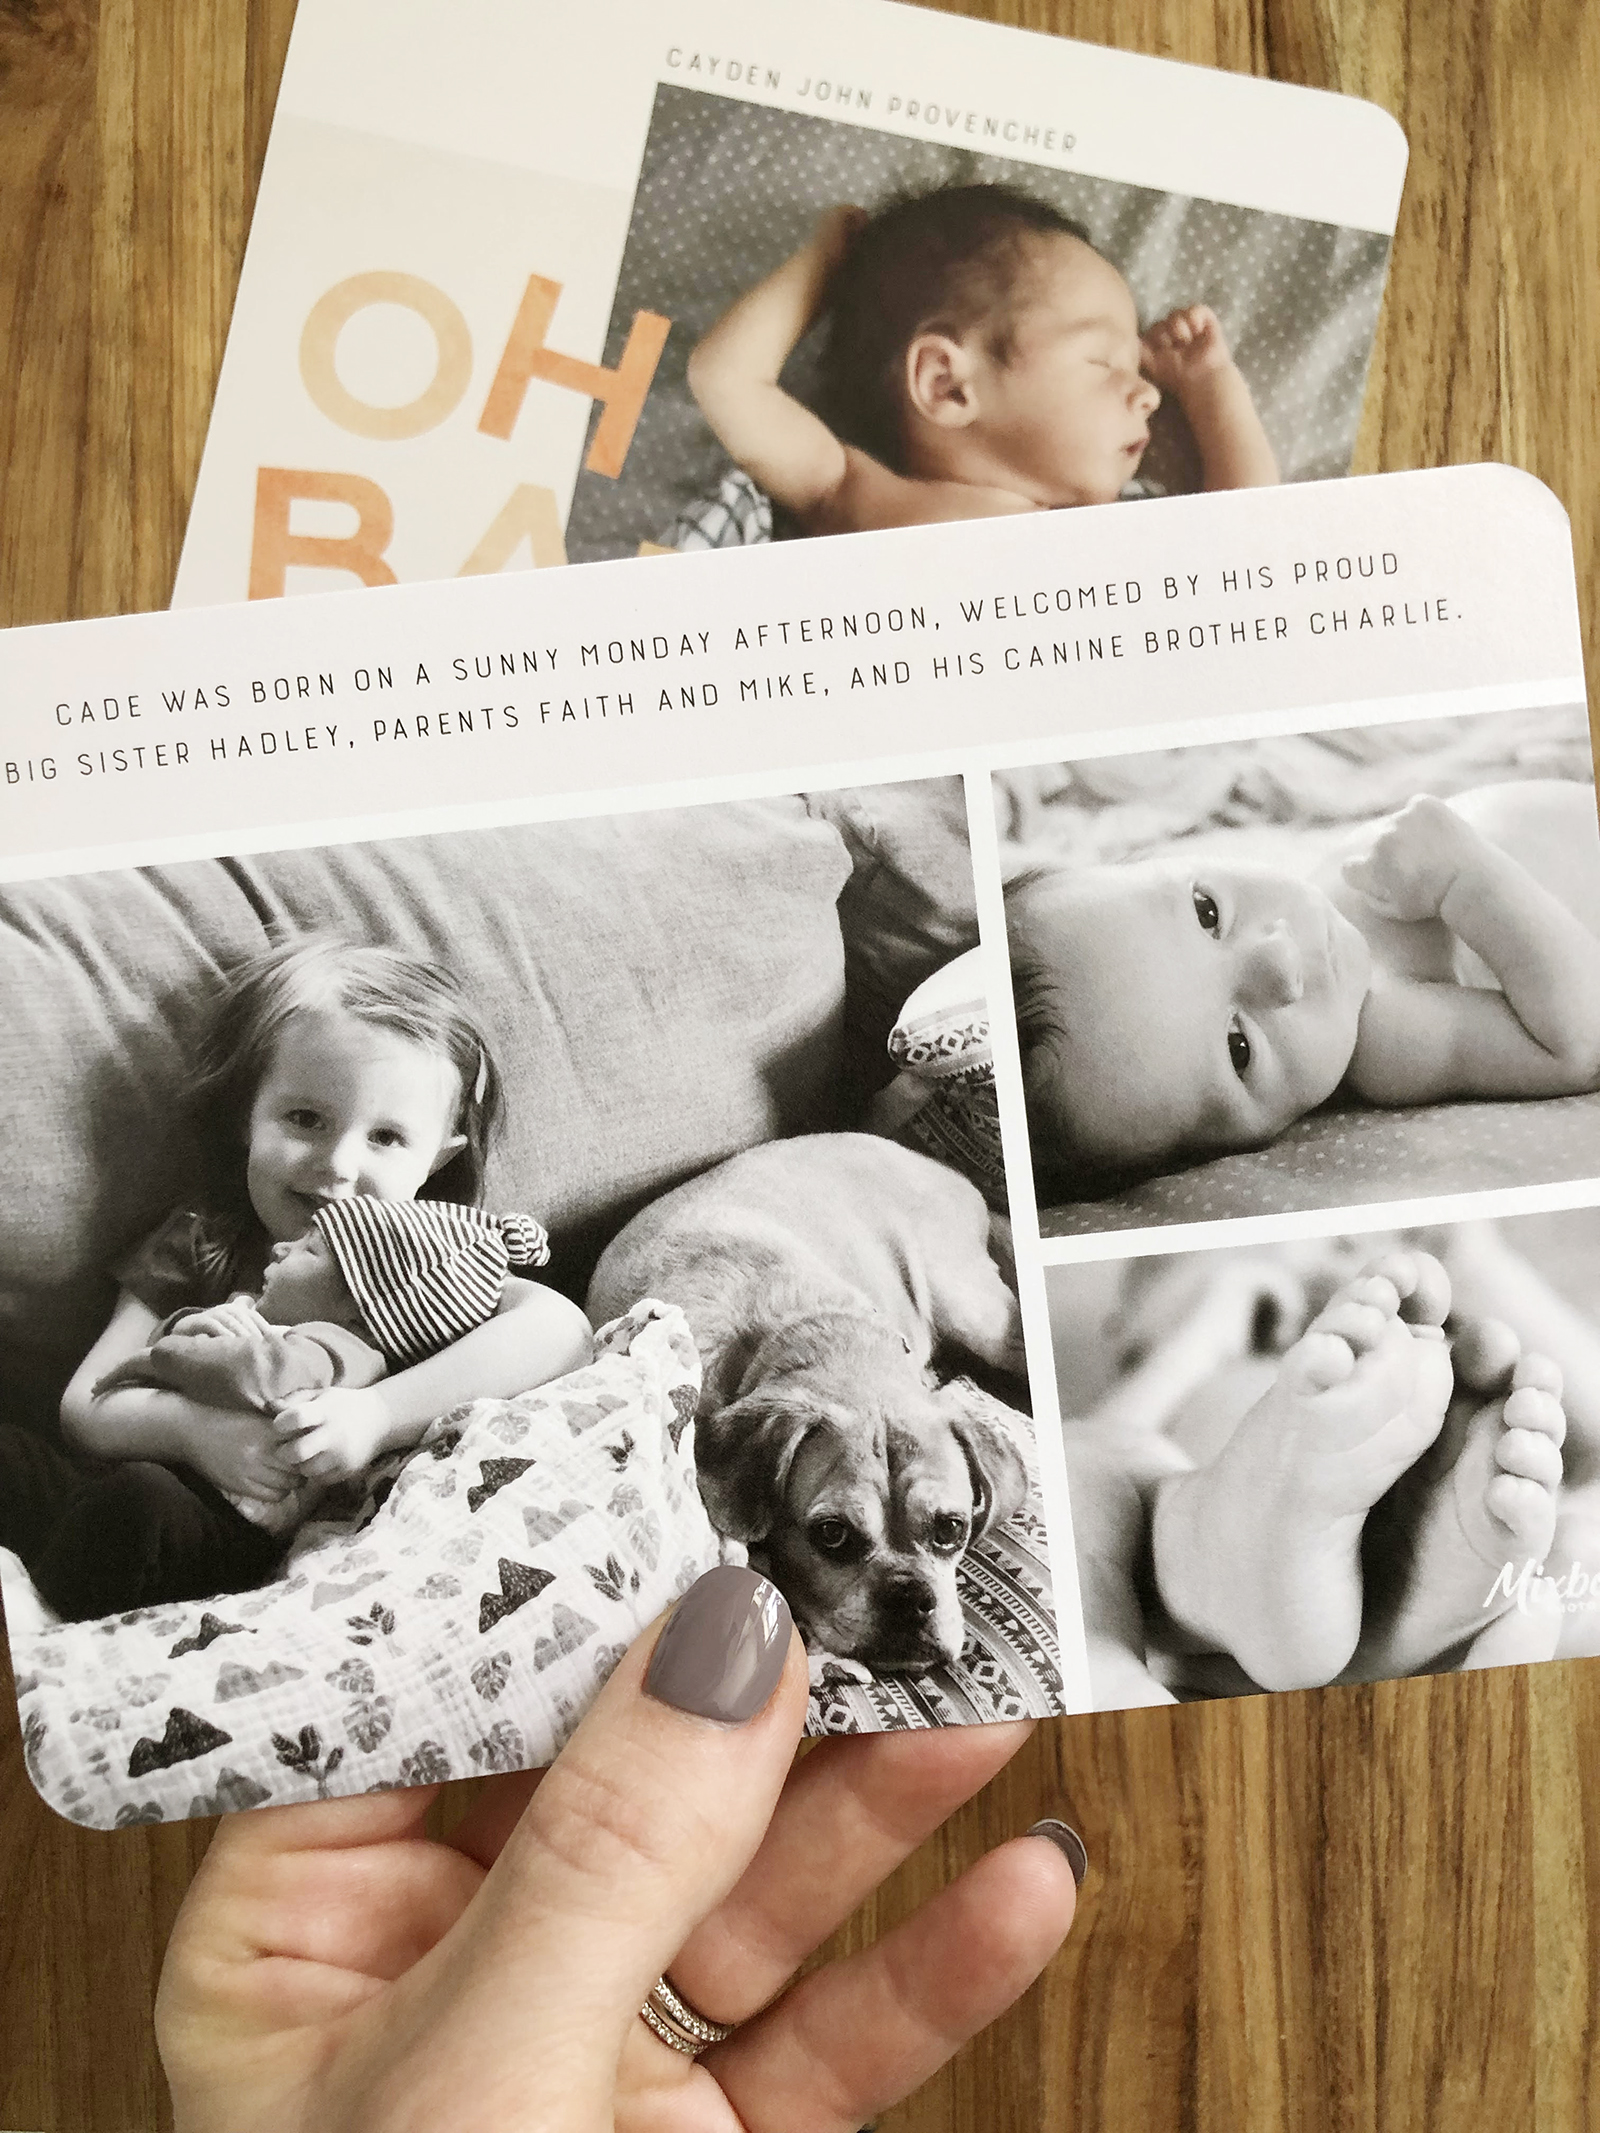 Newborn Photo Ideas + Tips For Taking Your Own Photos /// By Design Fixation #photo_ideas #newborn #baby_photos #birth_announcements